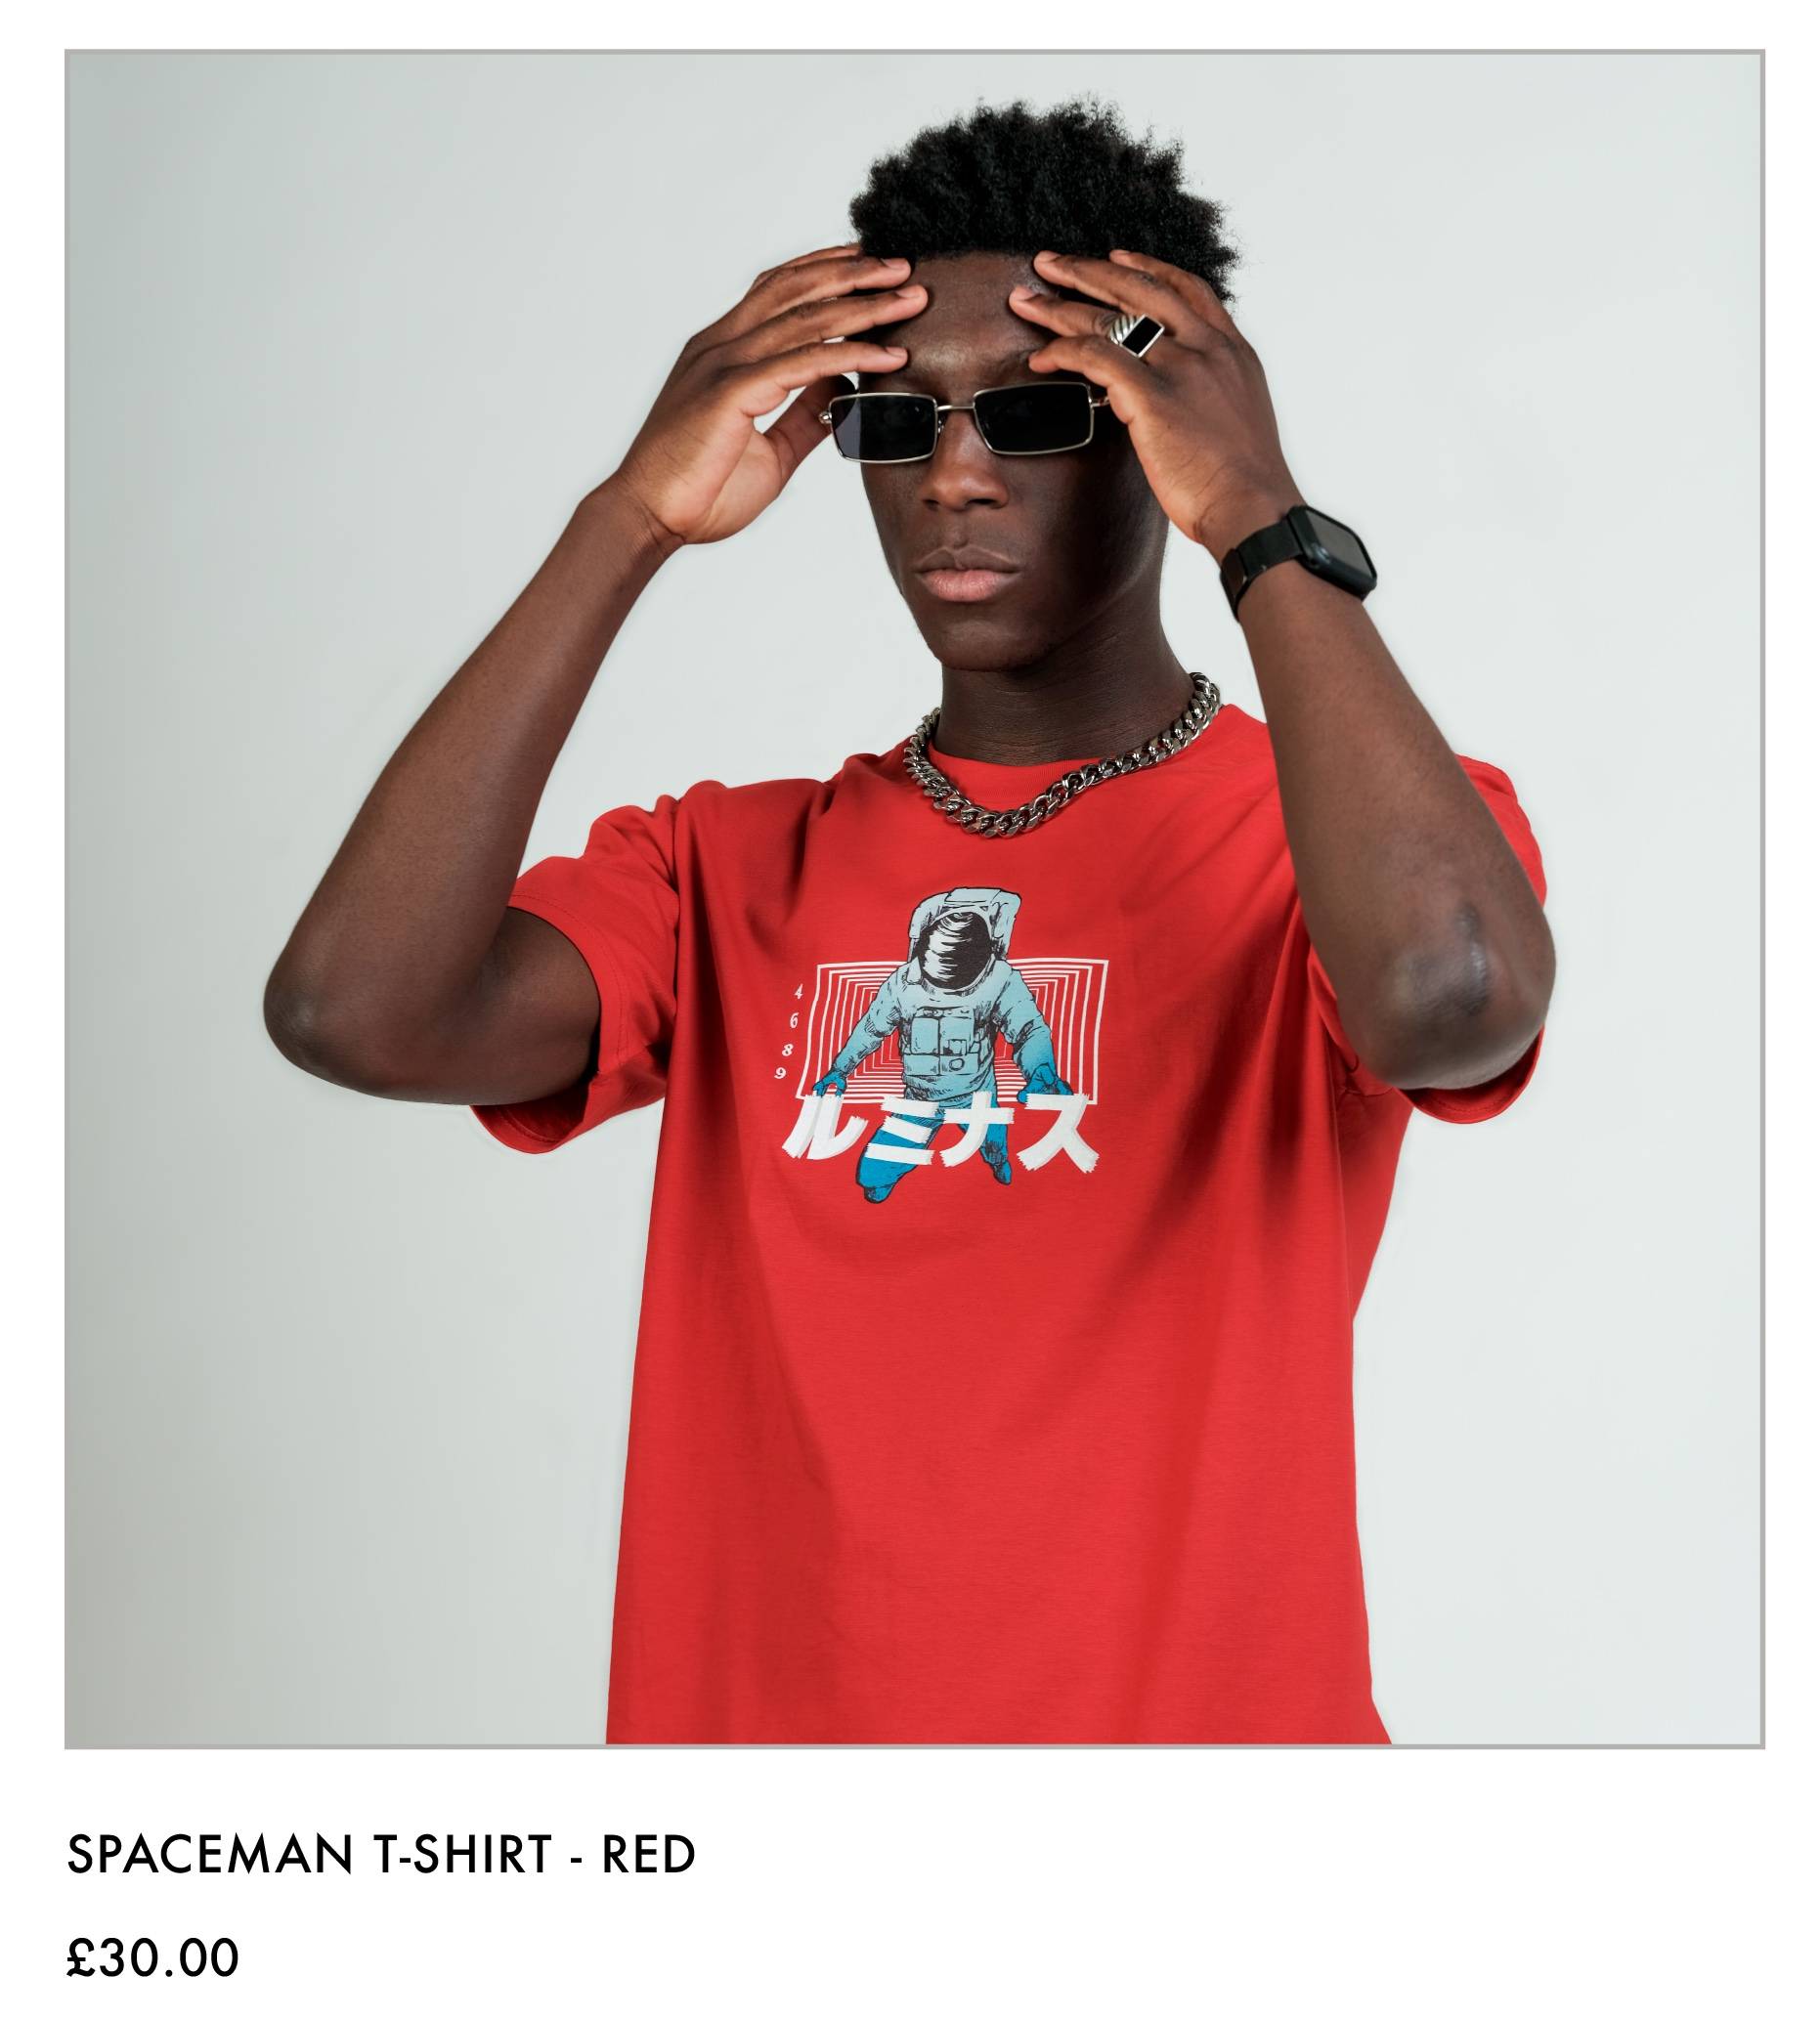 Spaceman T-shirt - Red